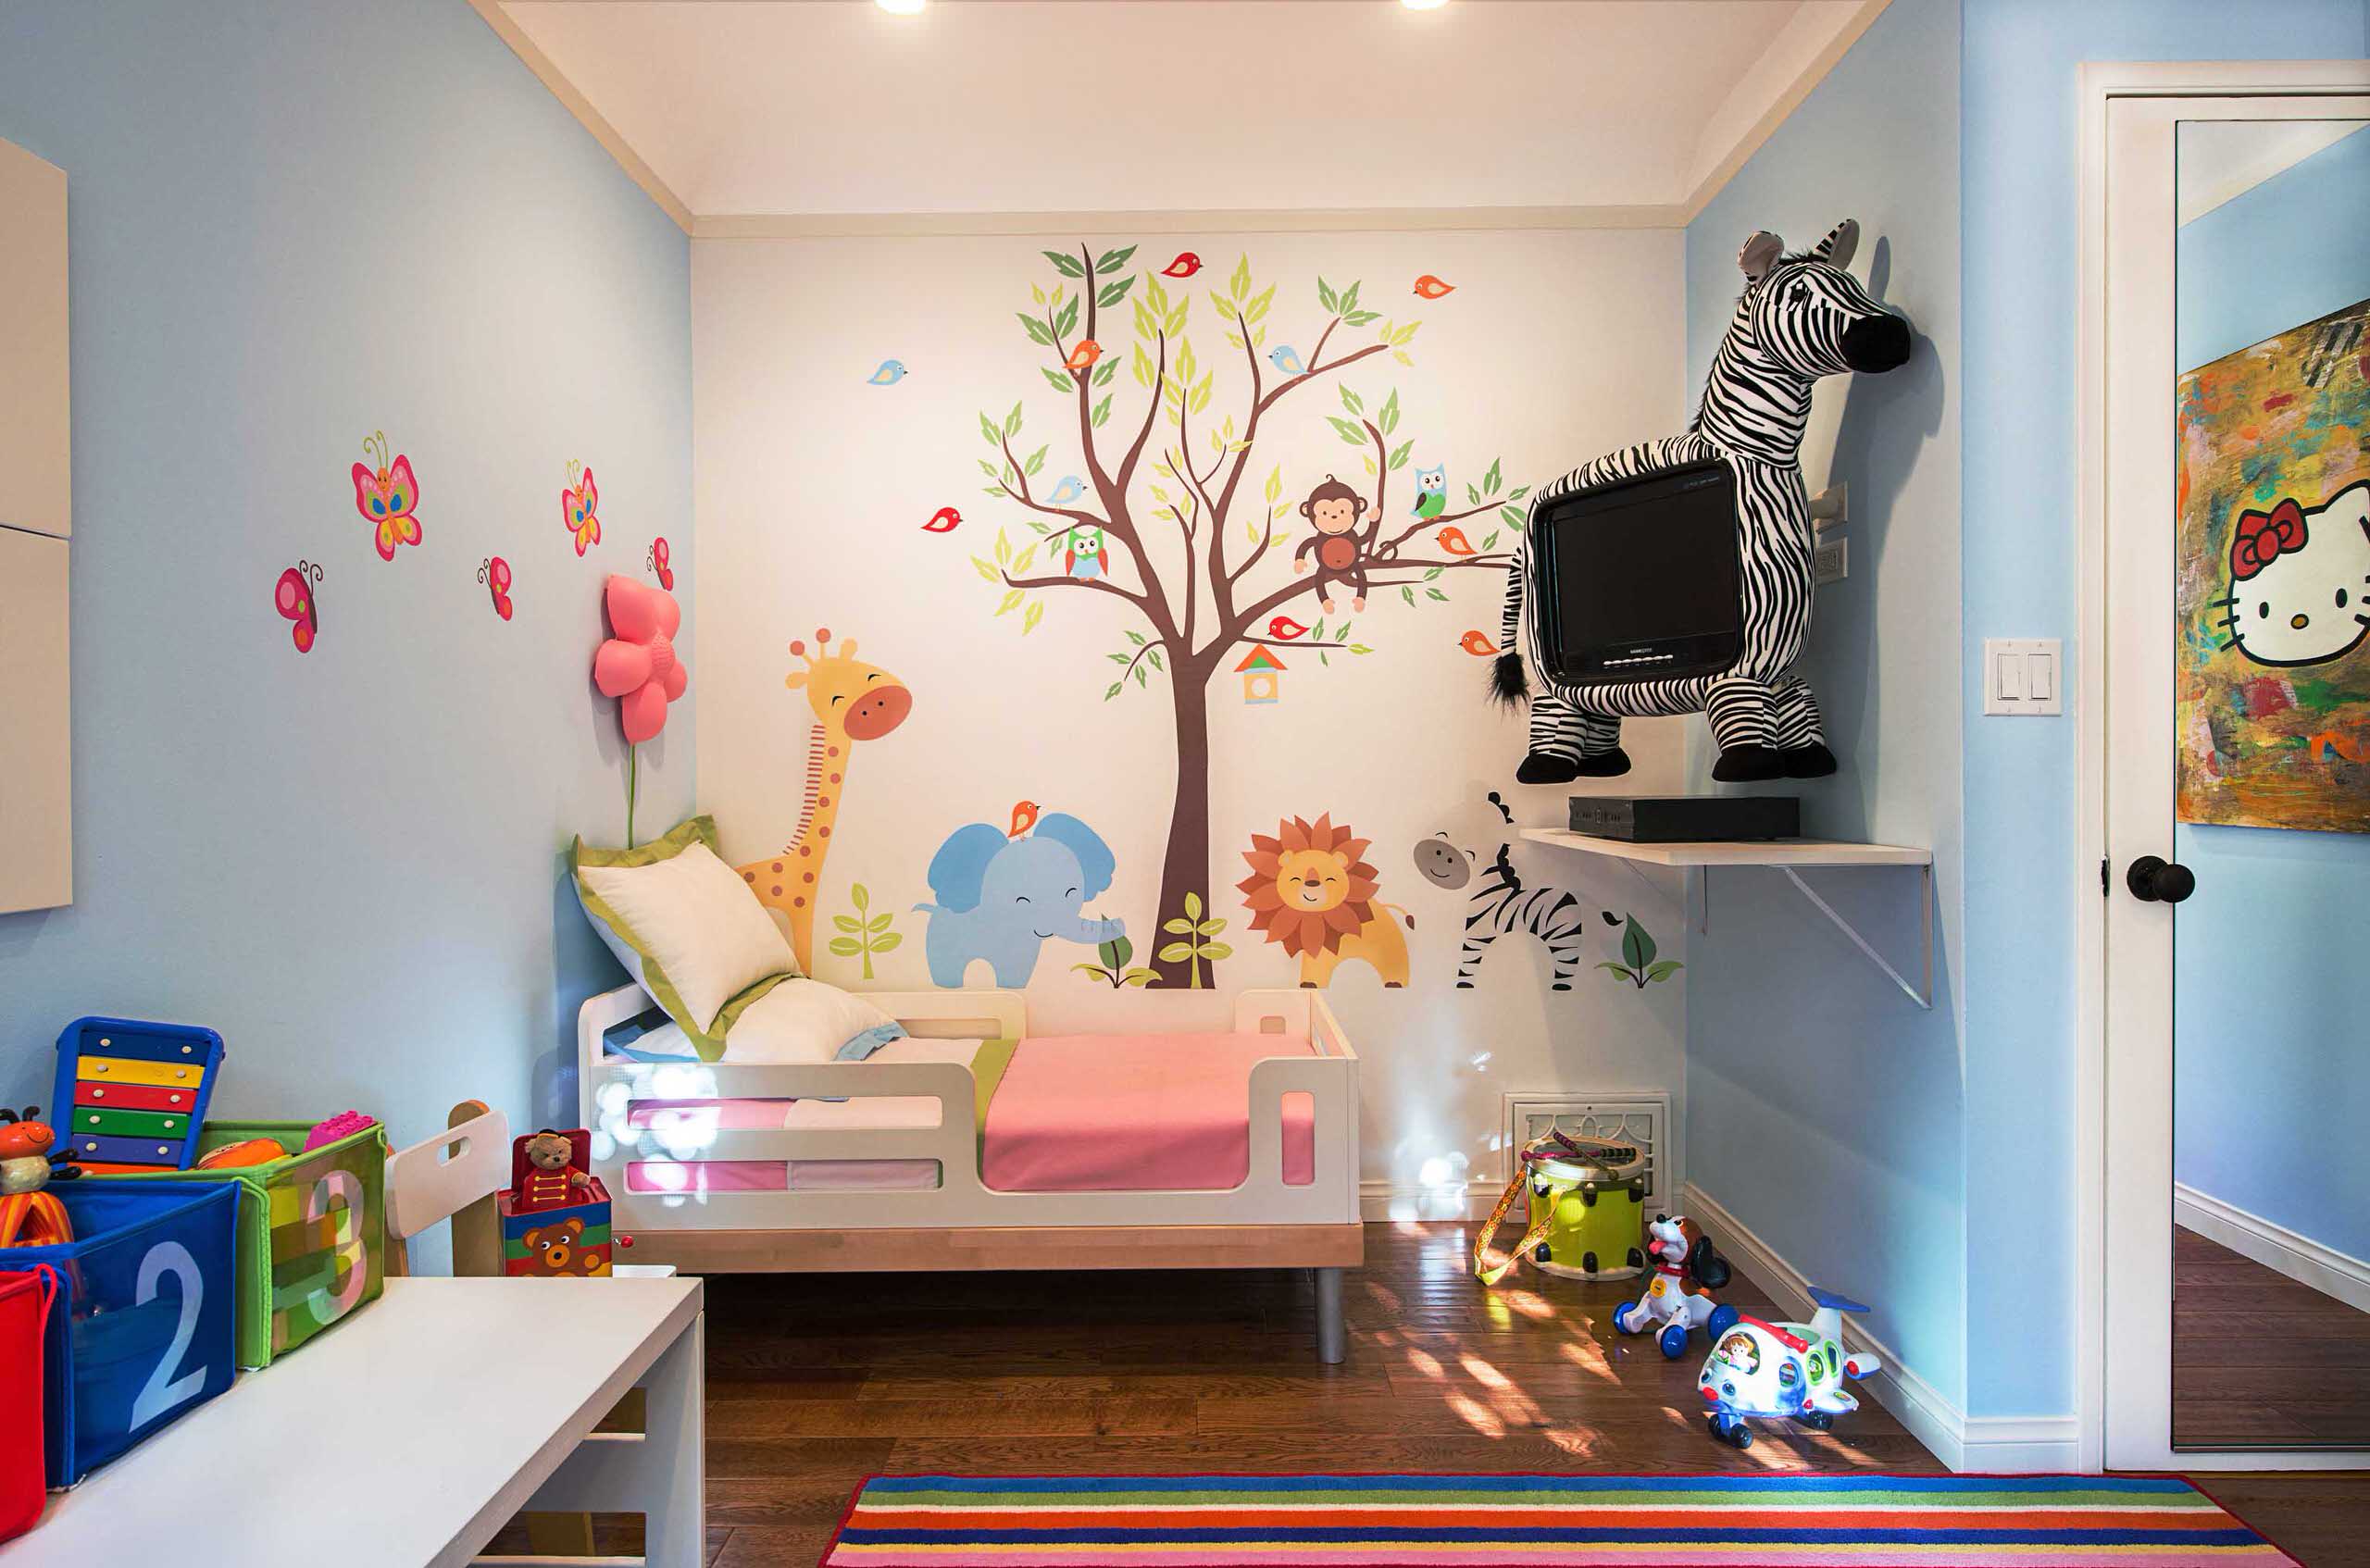 23 Wall Decor Ideas for Girls' Rooms